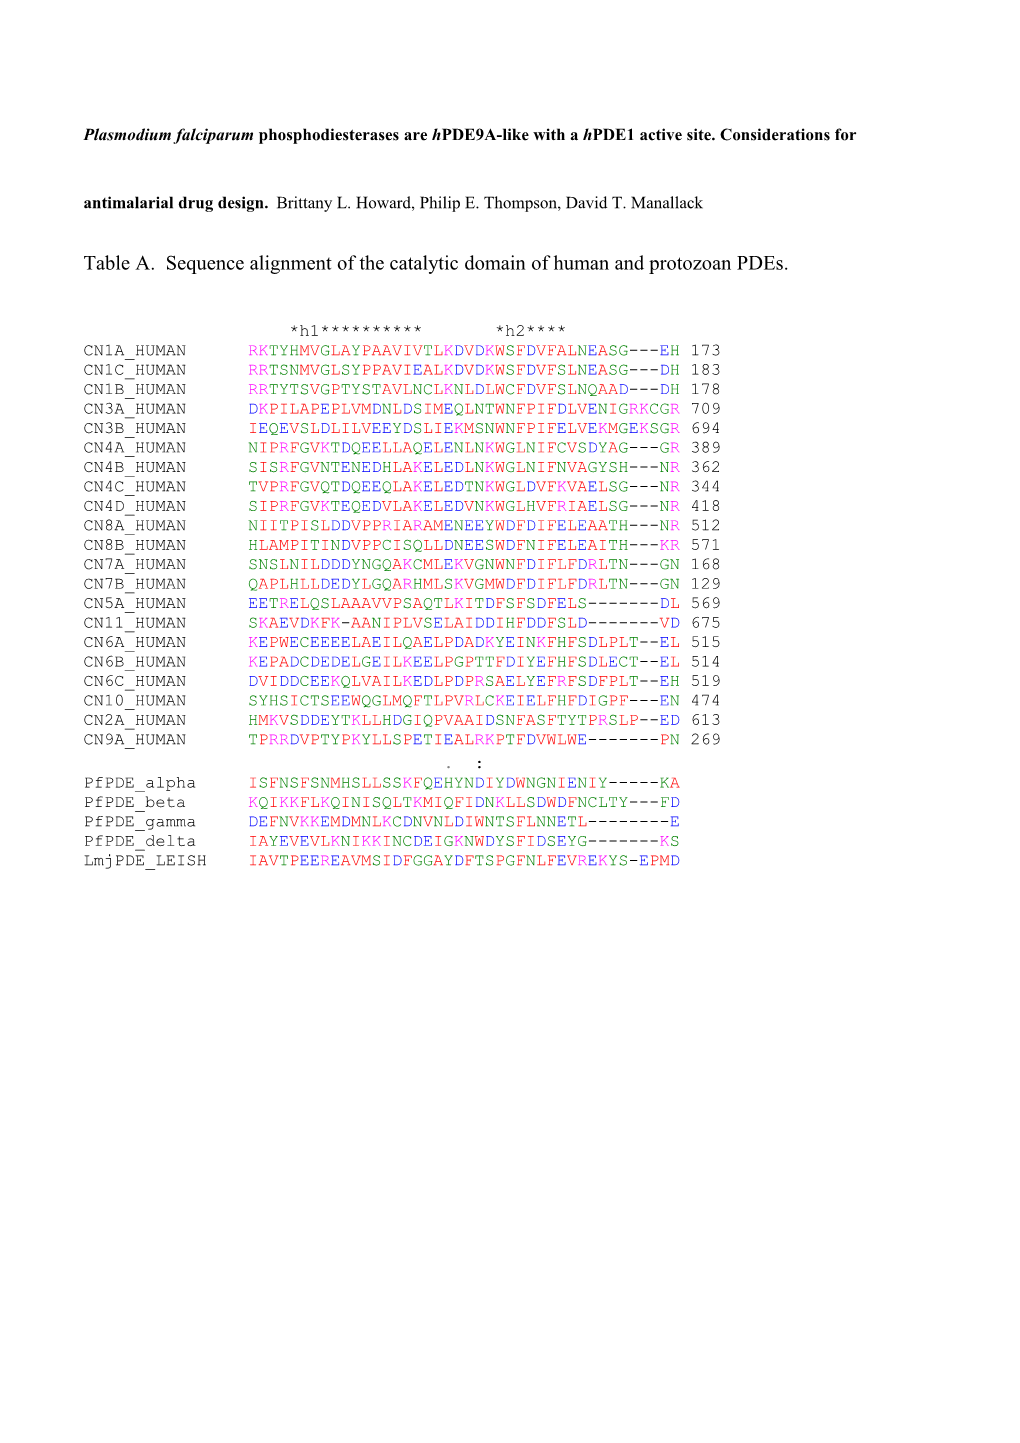 Table A. Sequence Alignment of the Catalytic Domain of Human and Protozoan Pdes